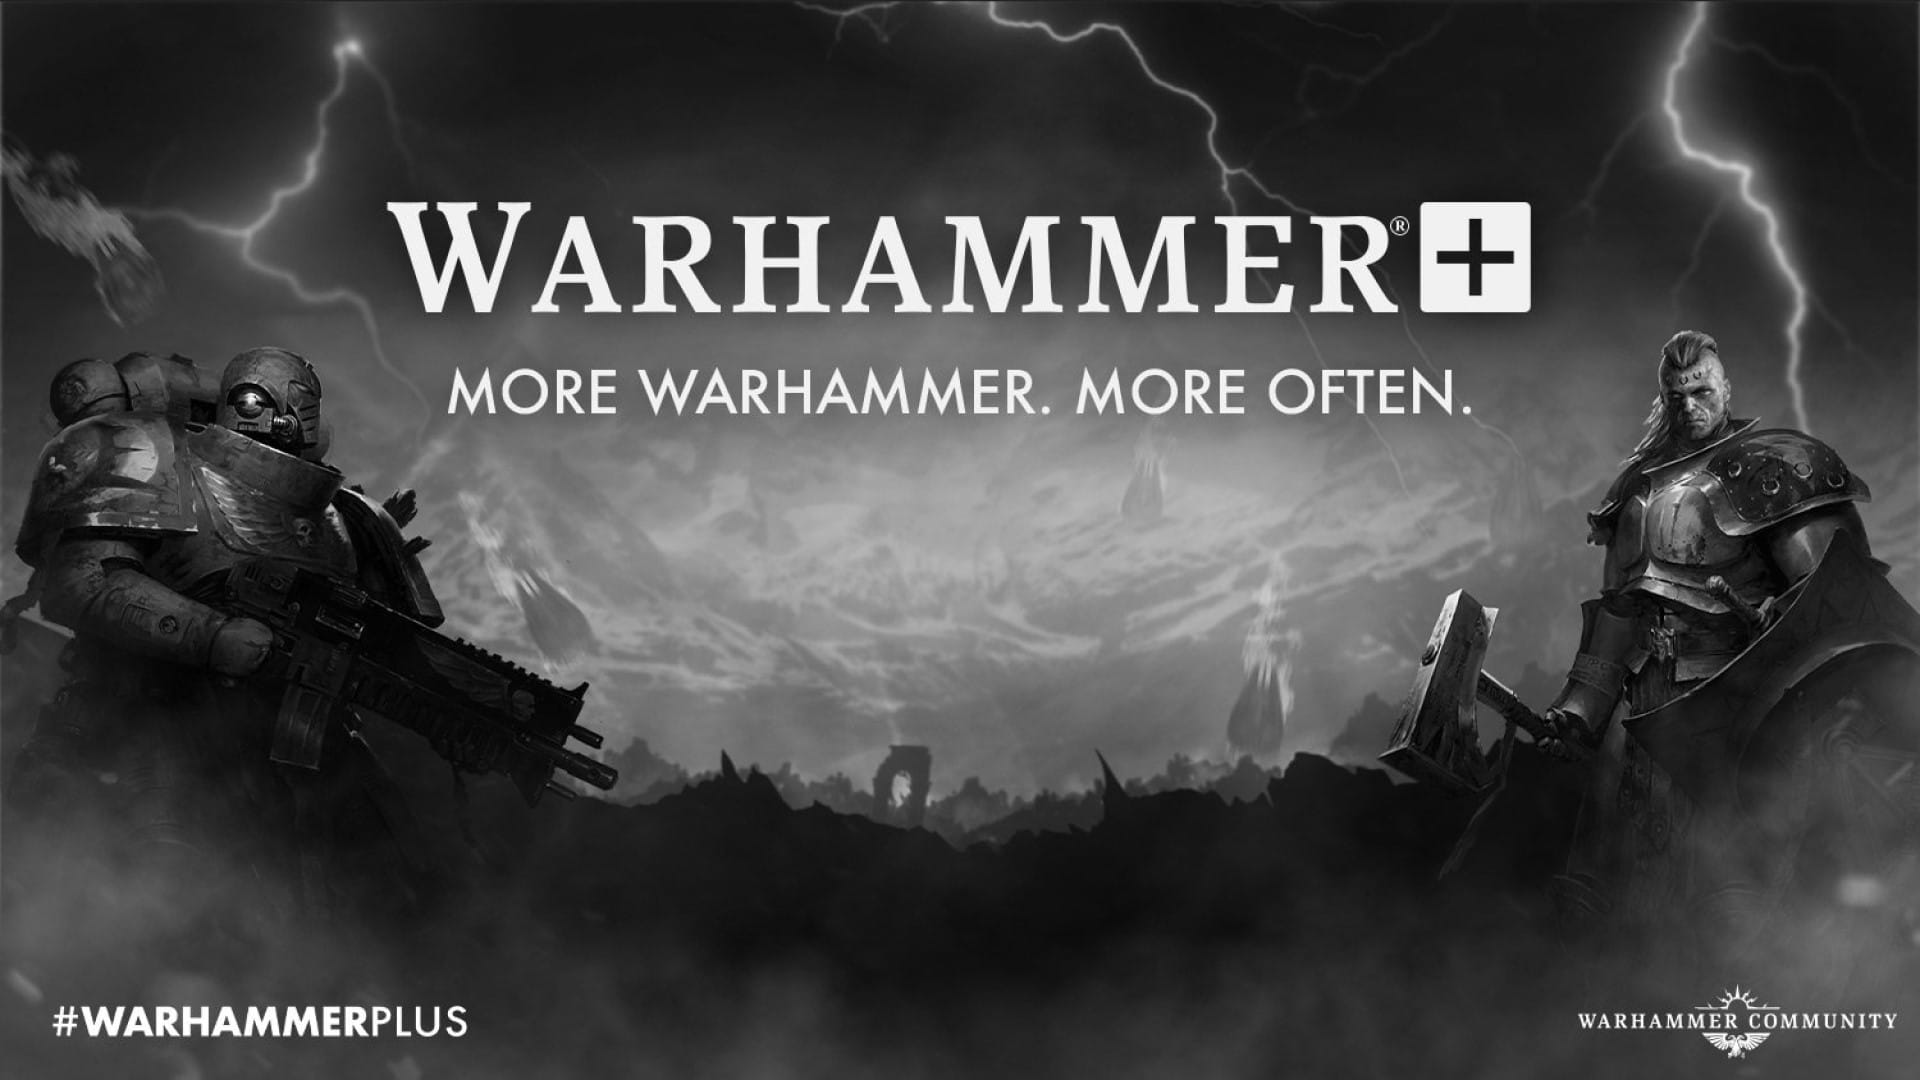 The logo for Warhammer+ over a grayscale battlefield